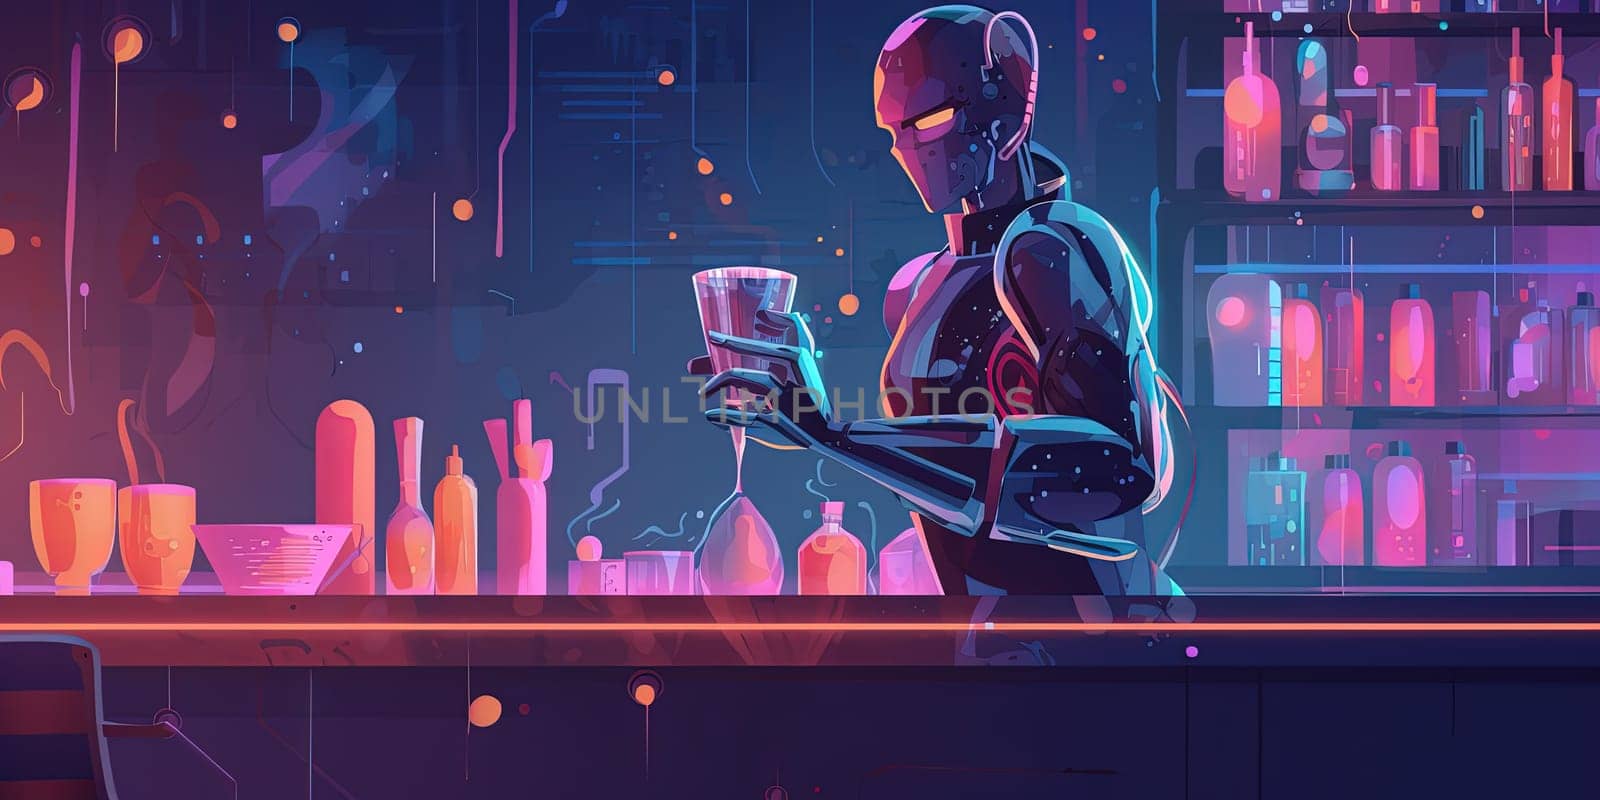 Illustration Of Android Robot Working Behind Bar Counter by GekaSkr